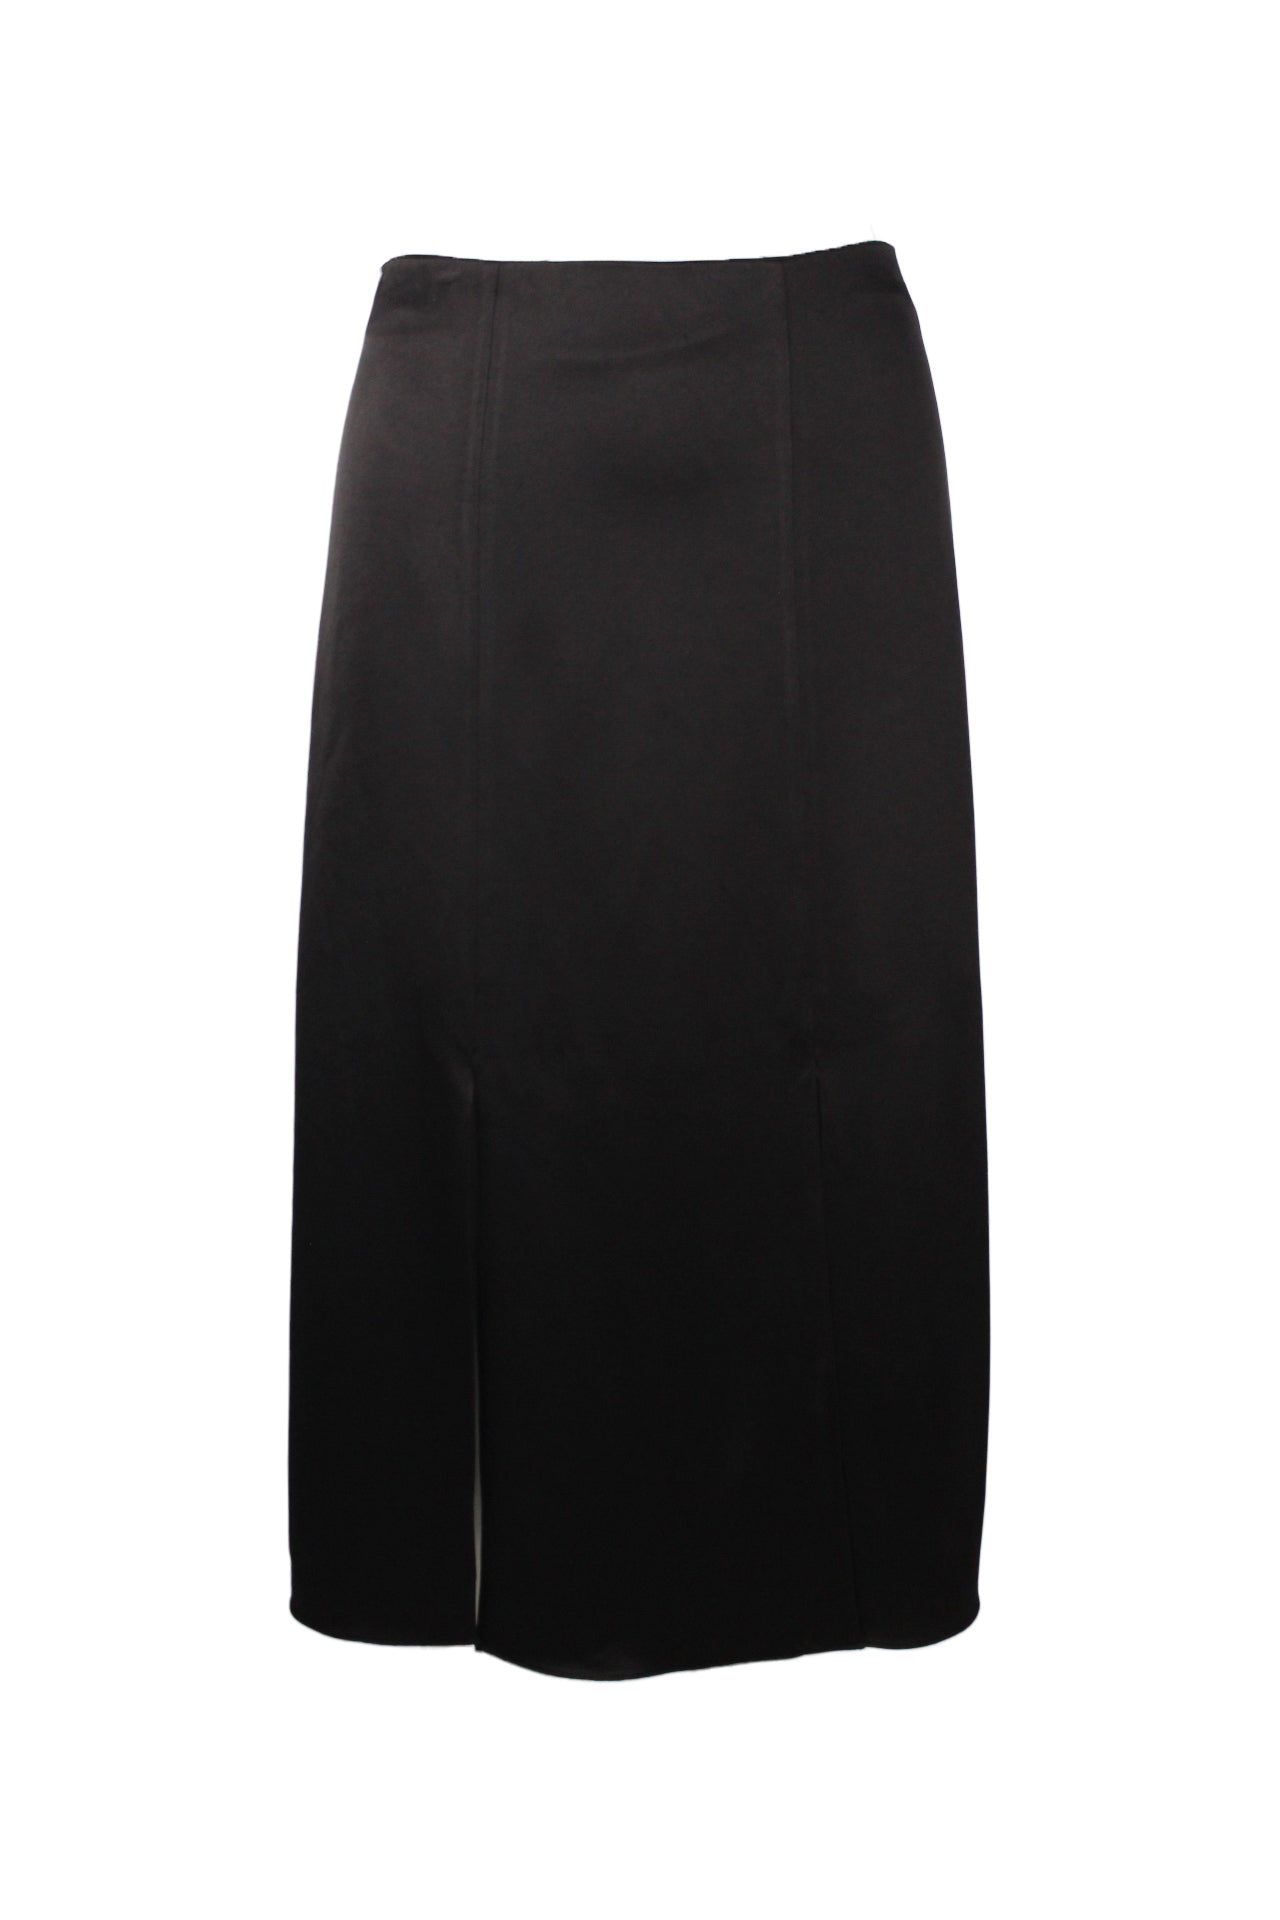 description: alice + olivia classics black midi skirt. features open slits at front and back, zipper closure at center back and fitted waist skirt. 